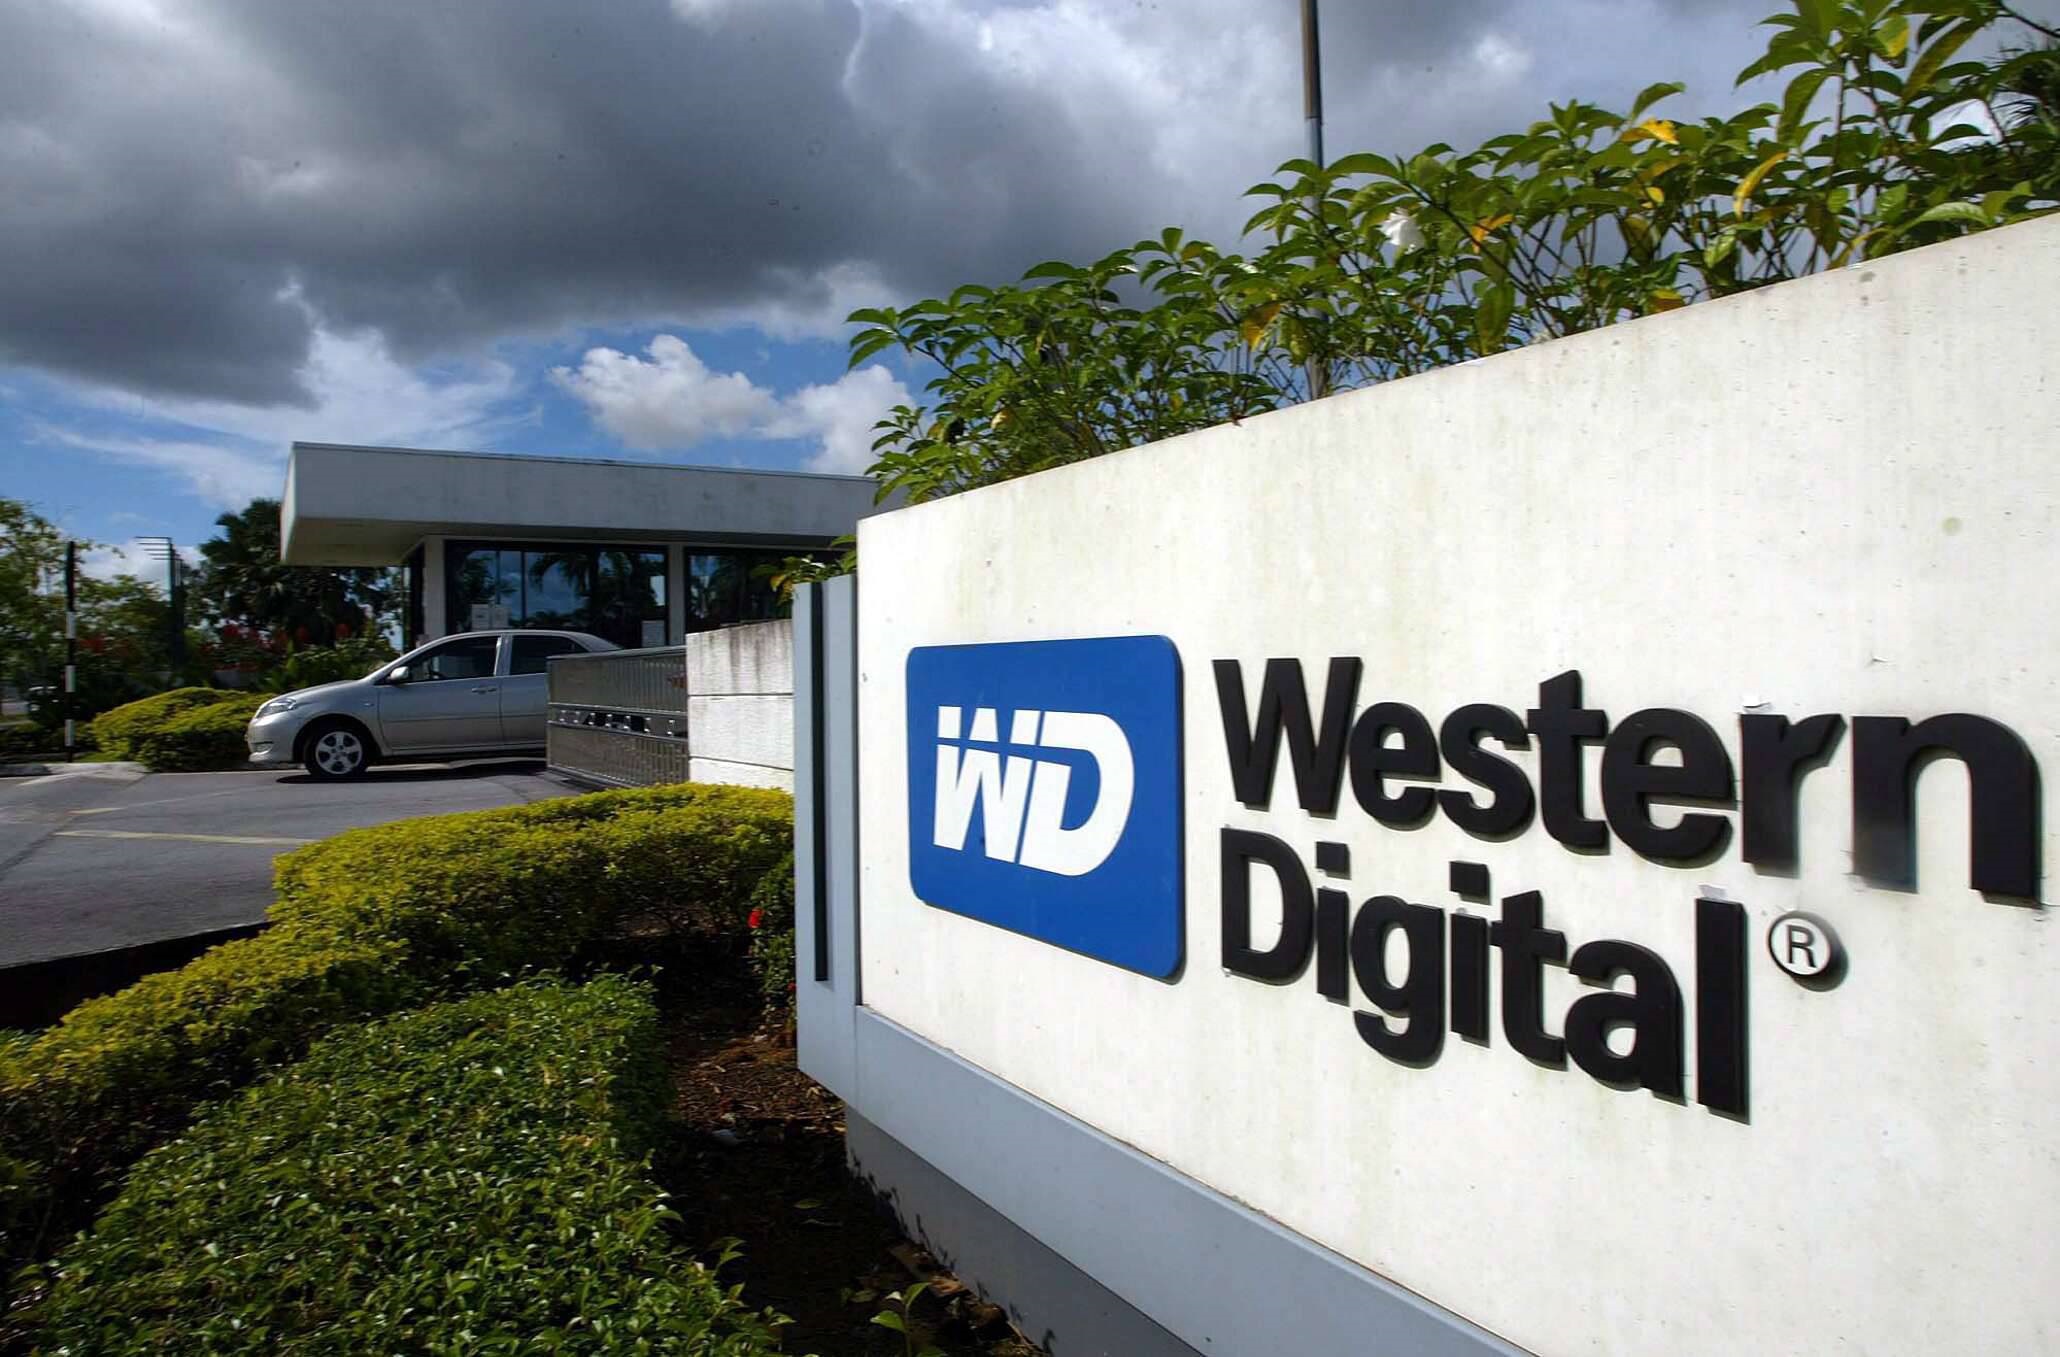 Western Digital: Second quarter 2022 earnings – EPS exceeds analyst expectations